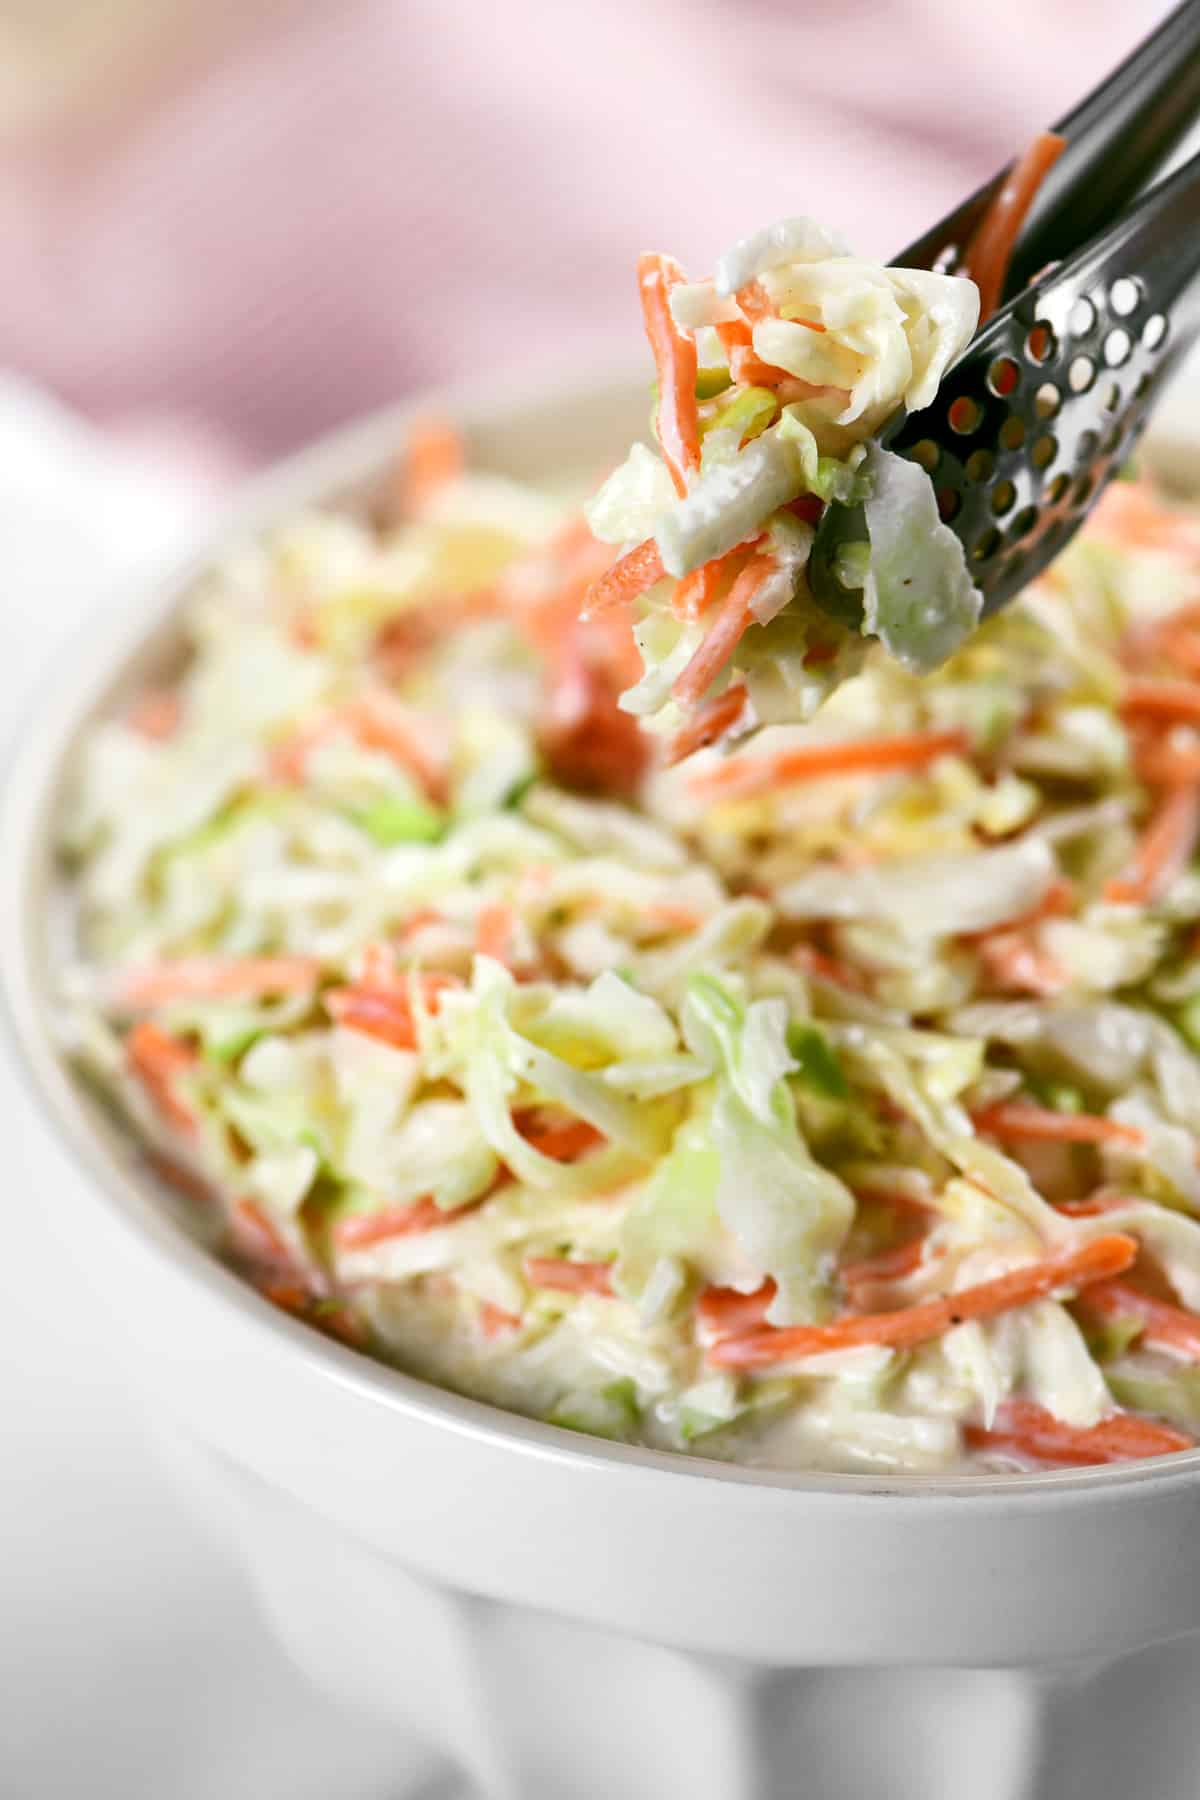 a pinch of coleslaw in a pair of serving tongs